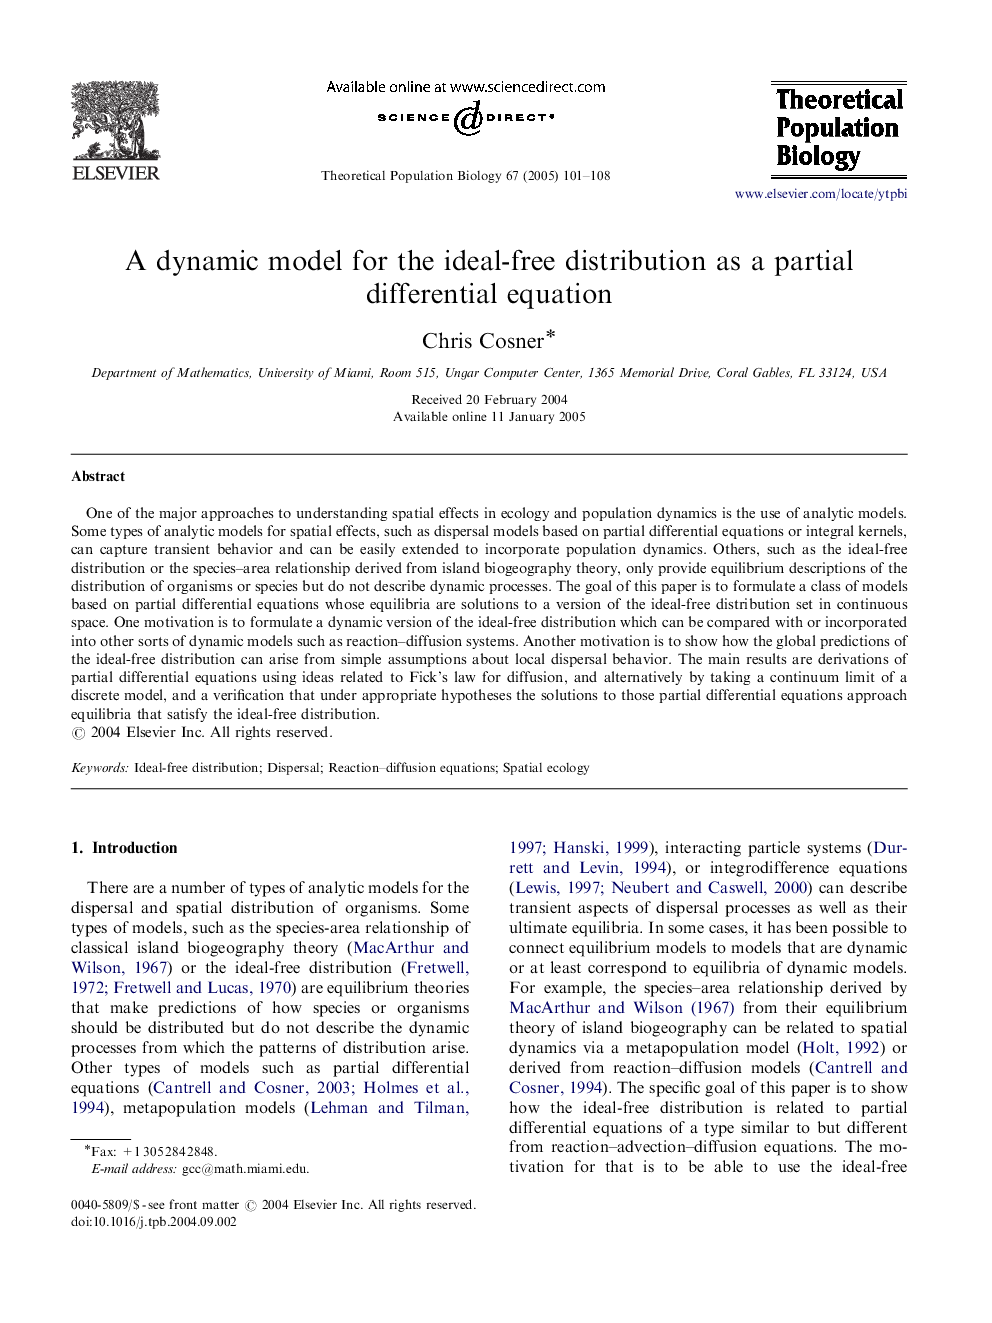 A dynamic model for the ideal-free distribution as a partial differential equation